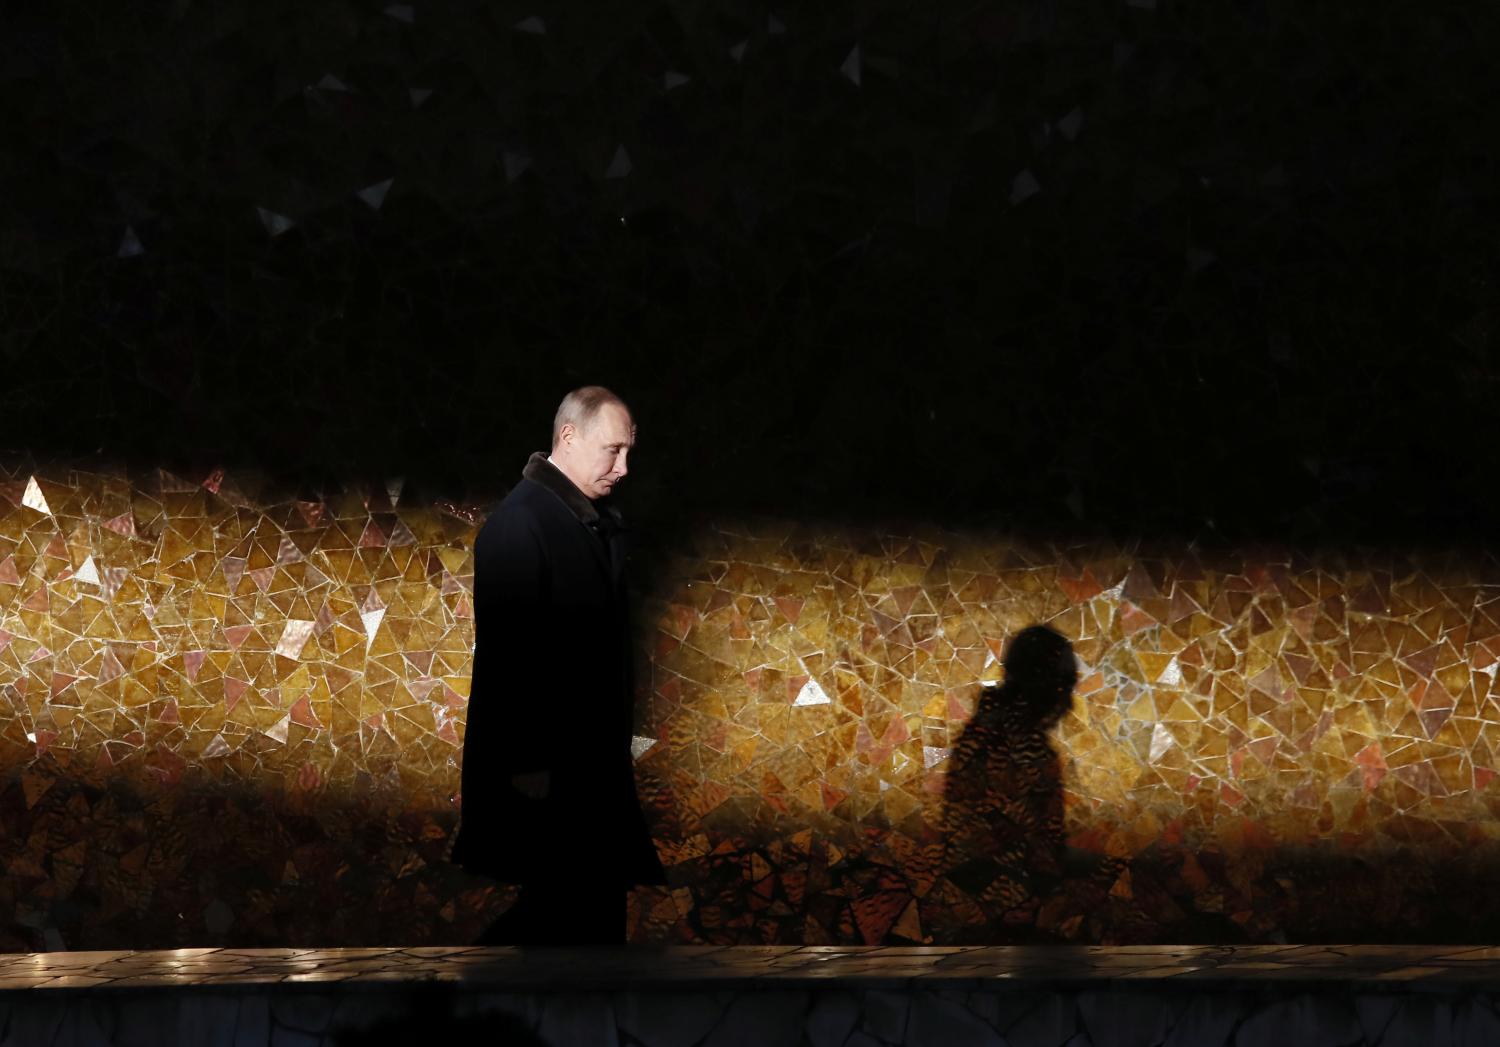 Russian President Putin attends a wreath laying ceremony at the eternal flame during an event to commemorate the 75th anniversary of the battle of Stalingrad in World War Two, at the Mamayev Kurgan memorial complex in Volgograd